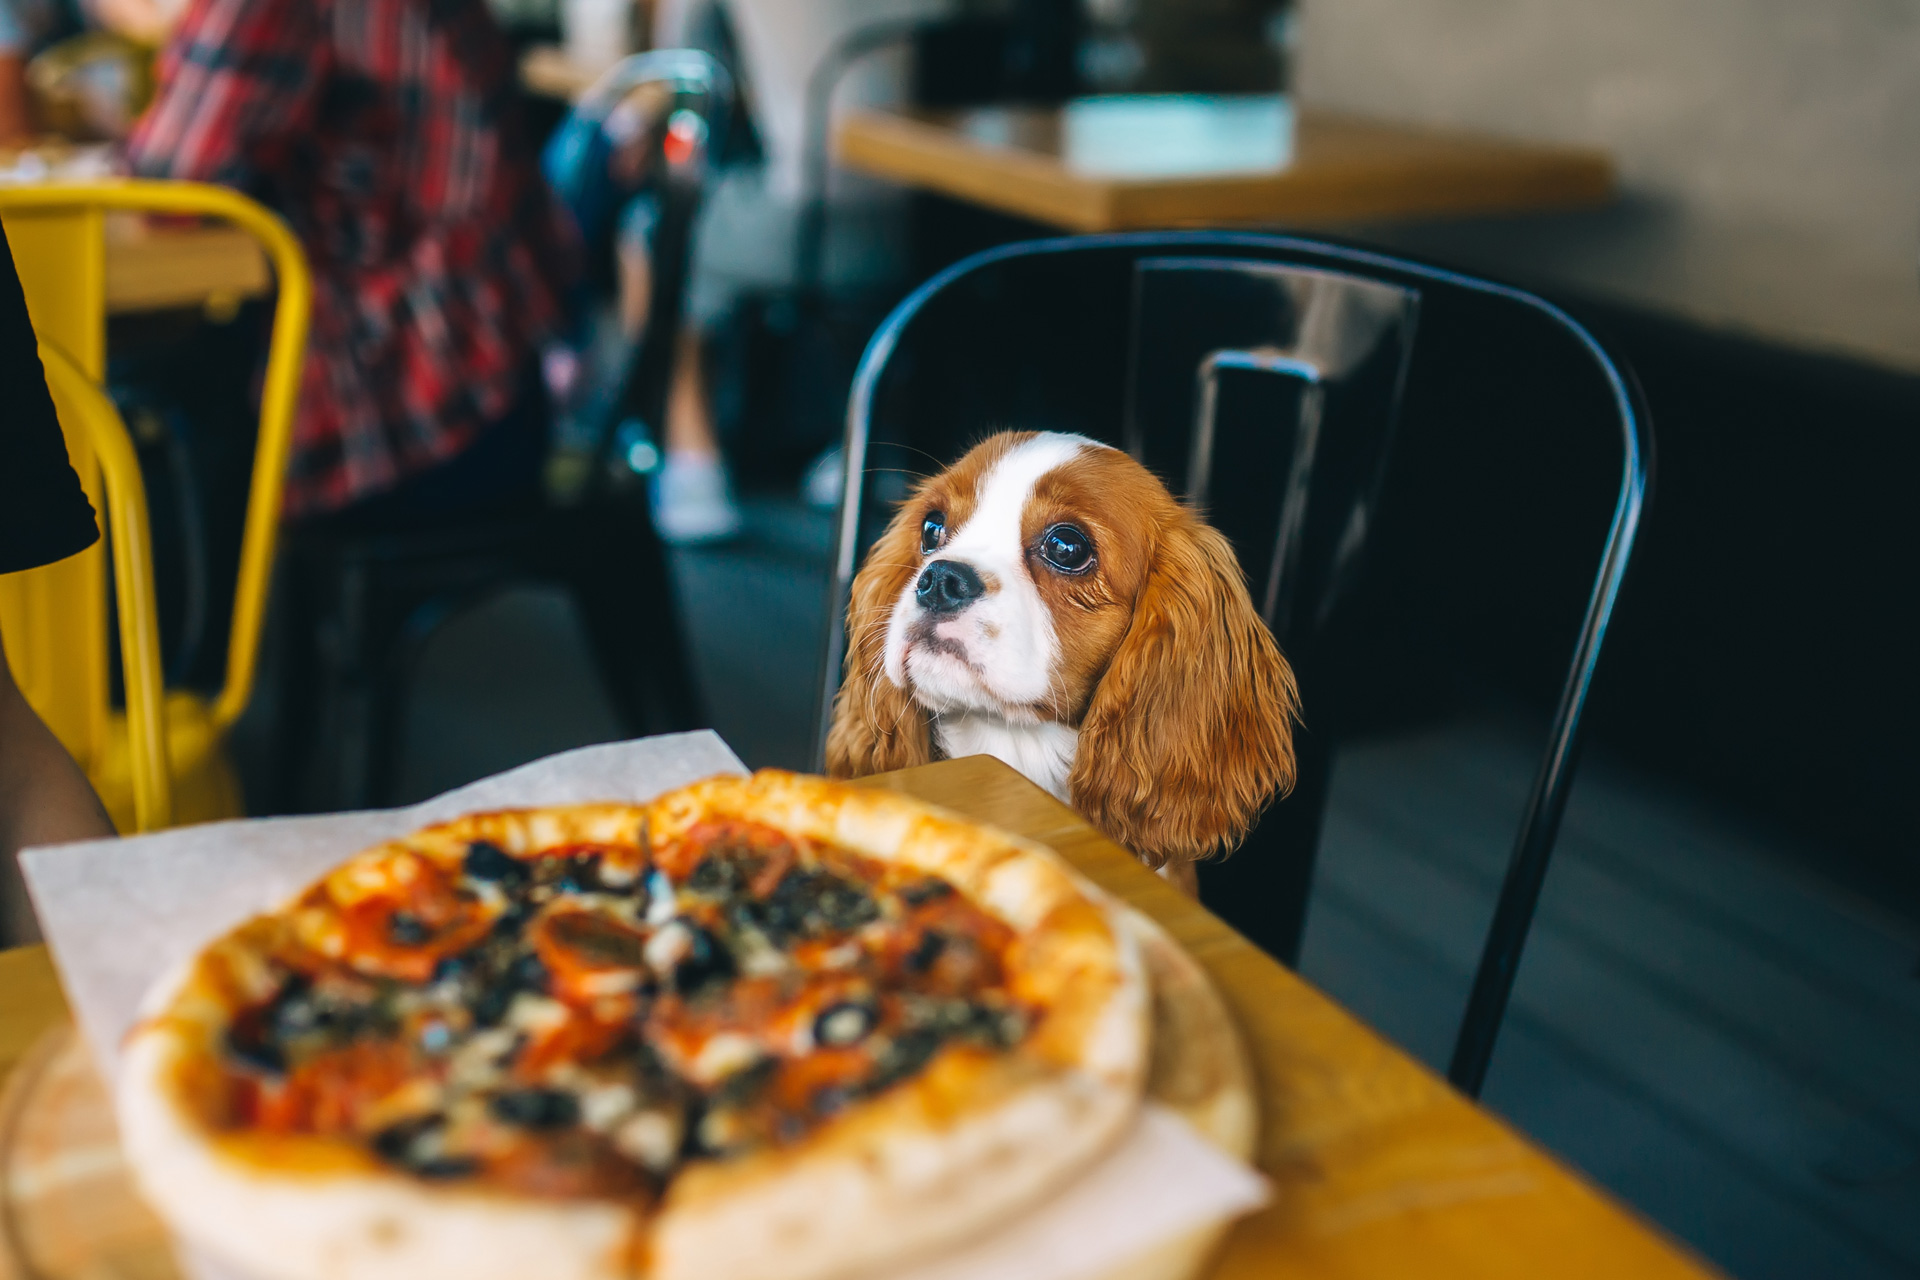 Dog at a restaurant with a pizza on the table